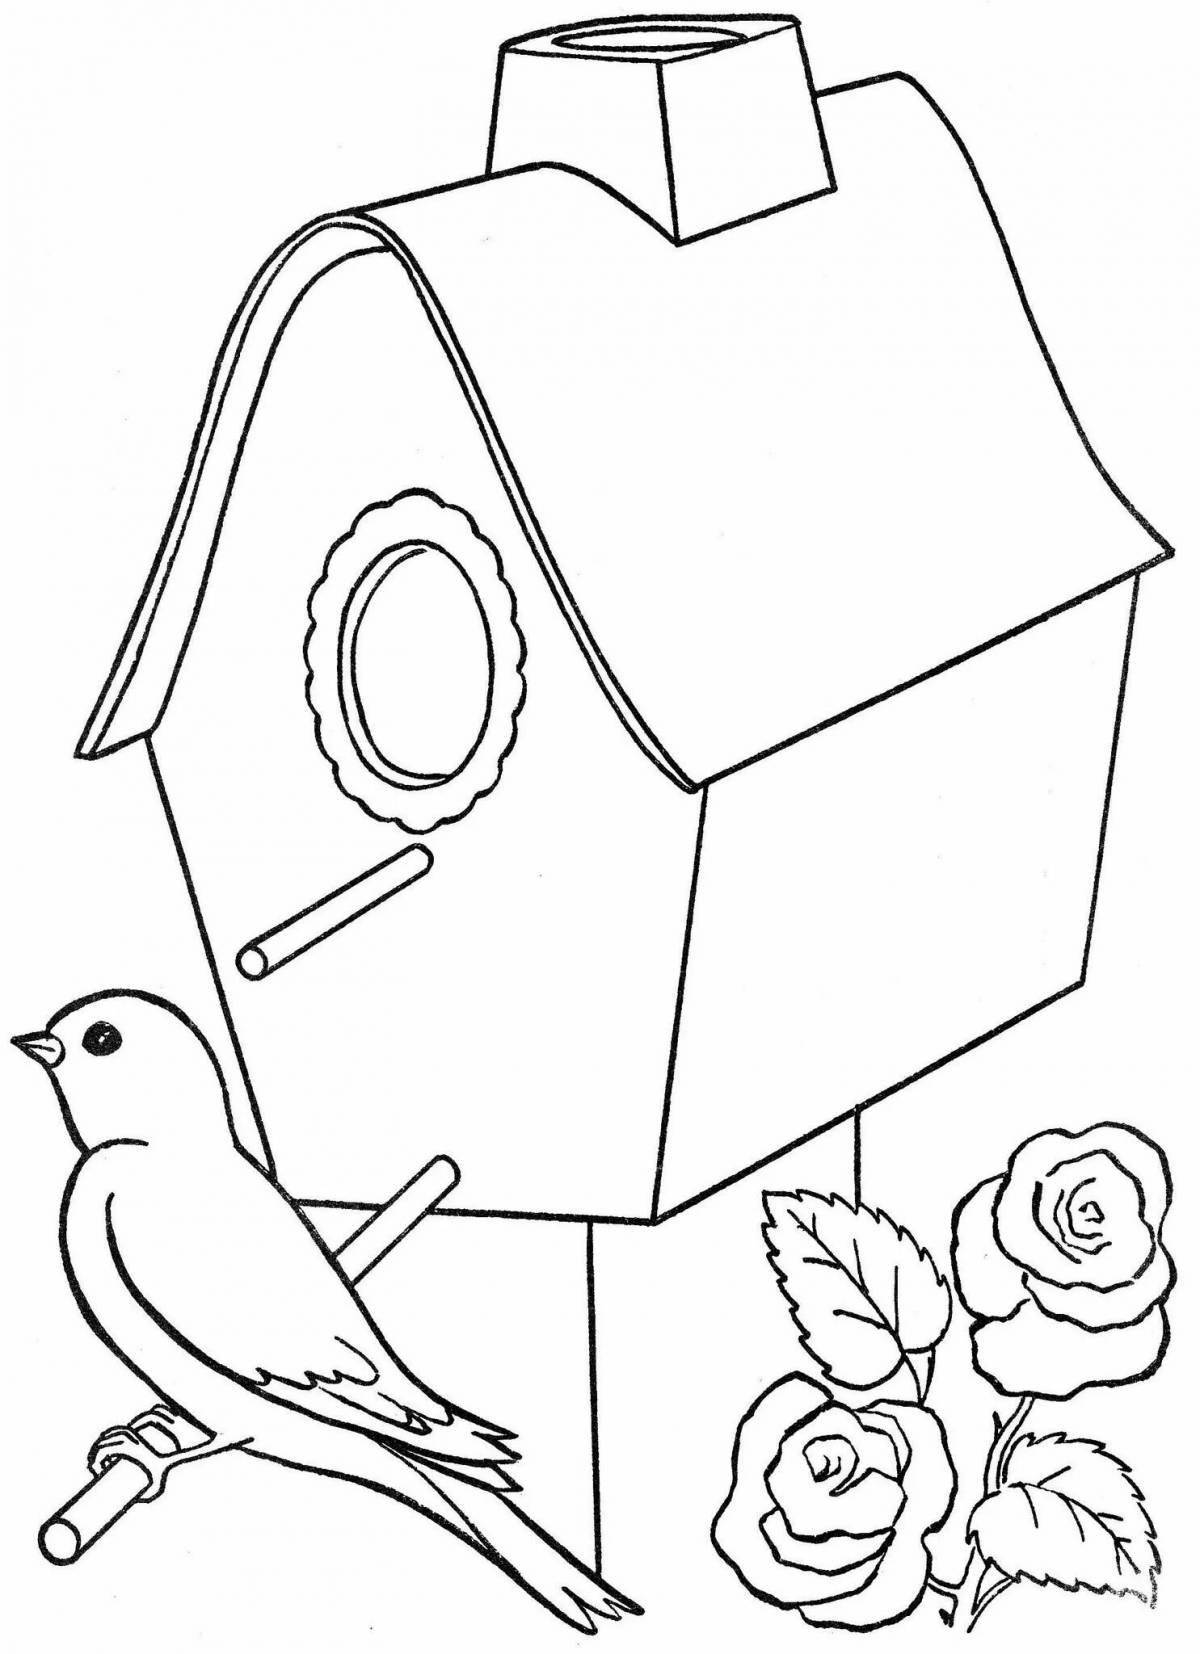 Incredible birdhouse coloring book for kids 3-4 years old